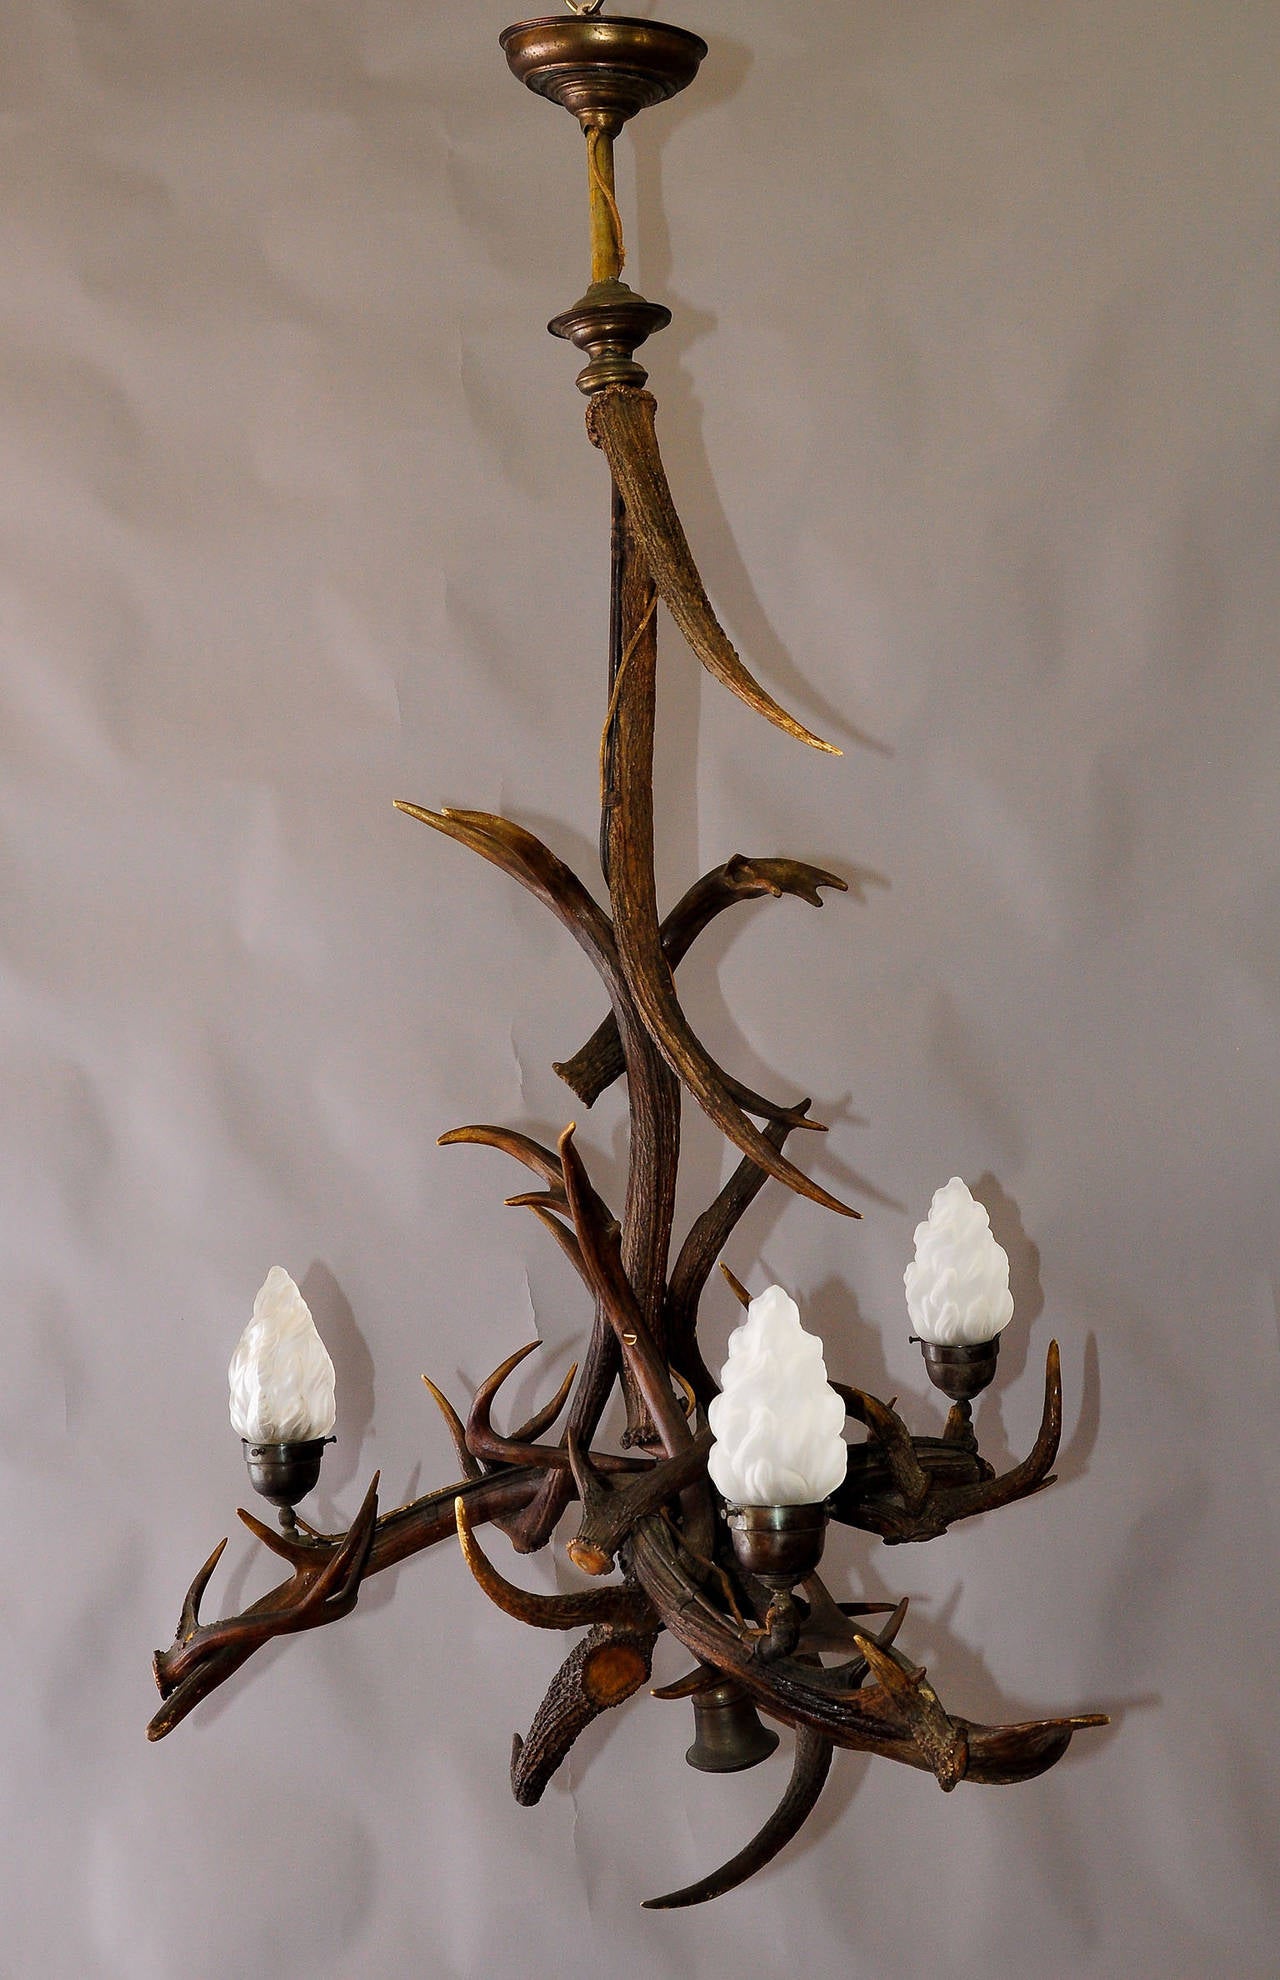 A large chandelier made of several stag and Virginia deer antlers, with four spouts and three glass shades in the design of flames. Manufactured circa 1930. Originally for gas. Later electrified.